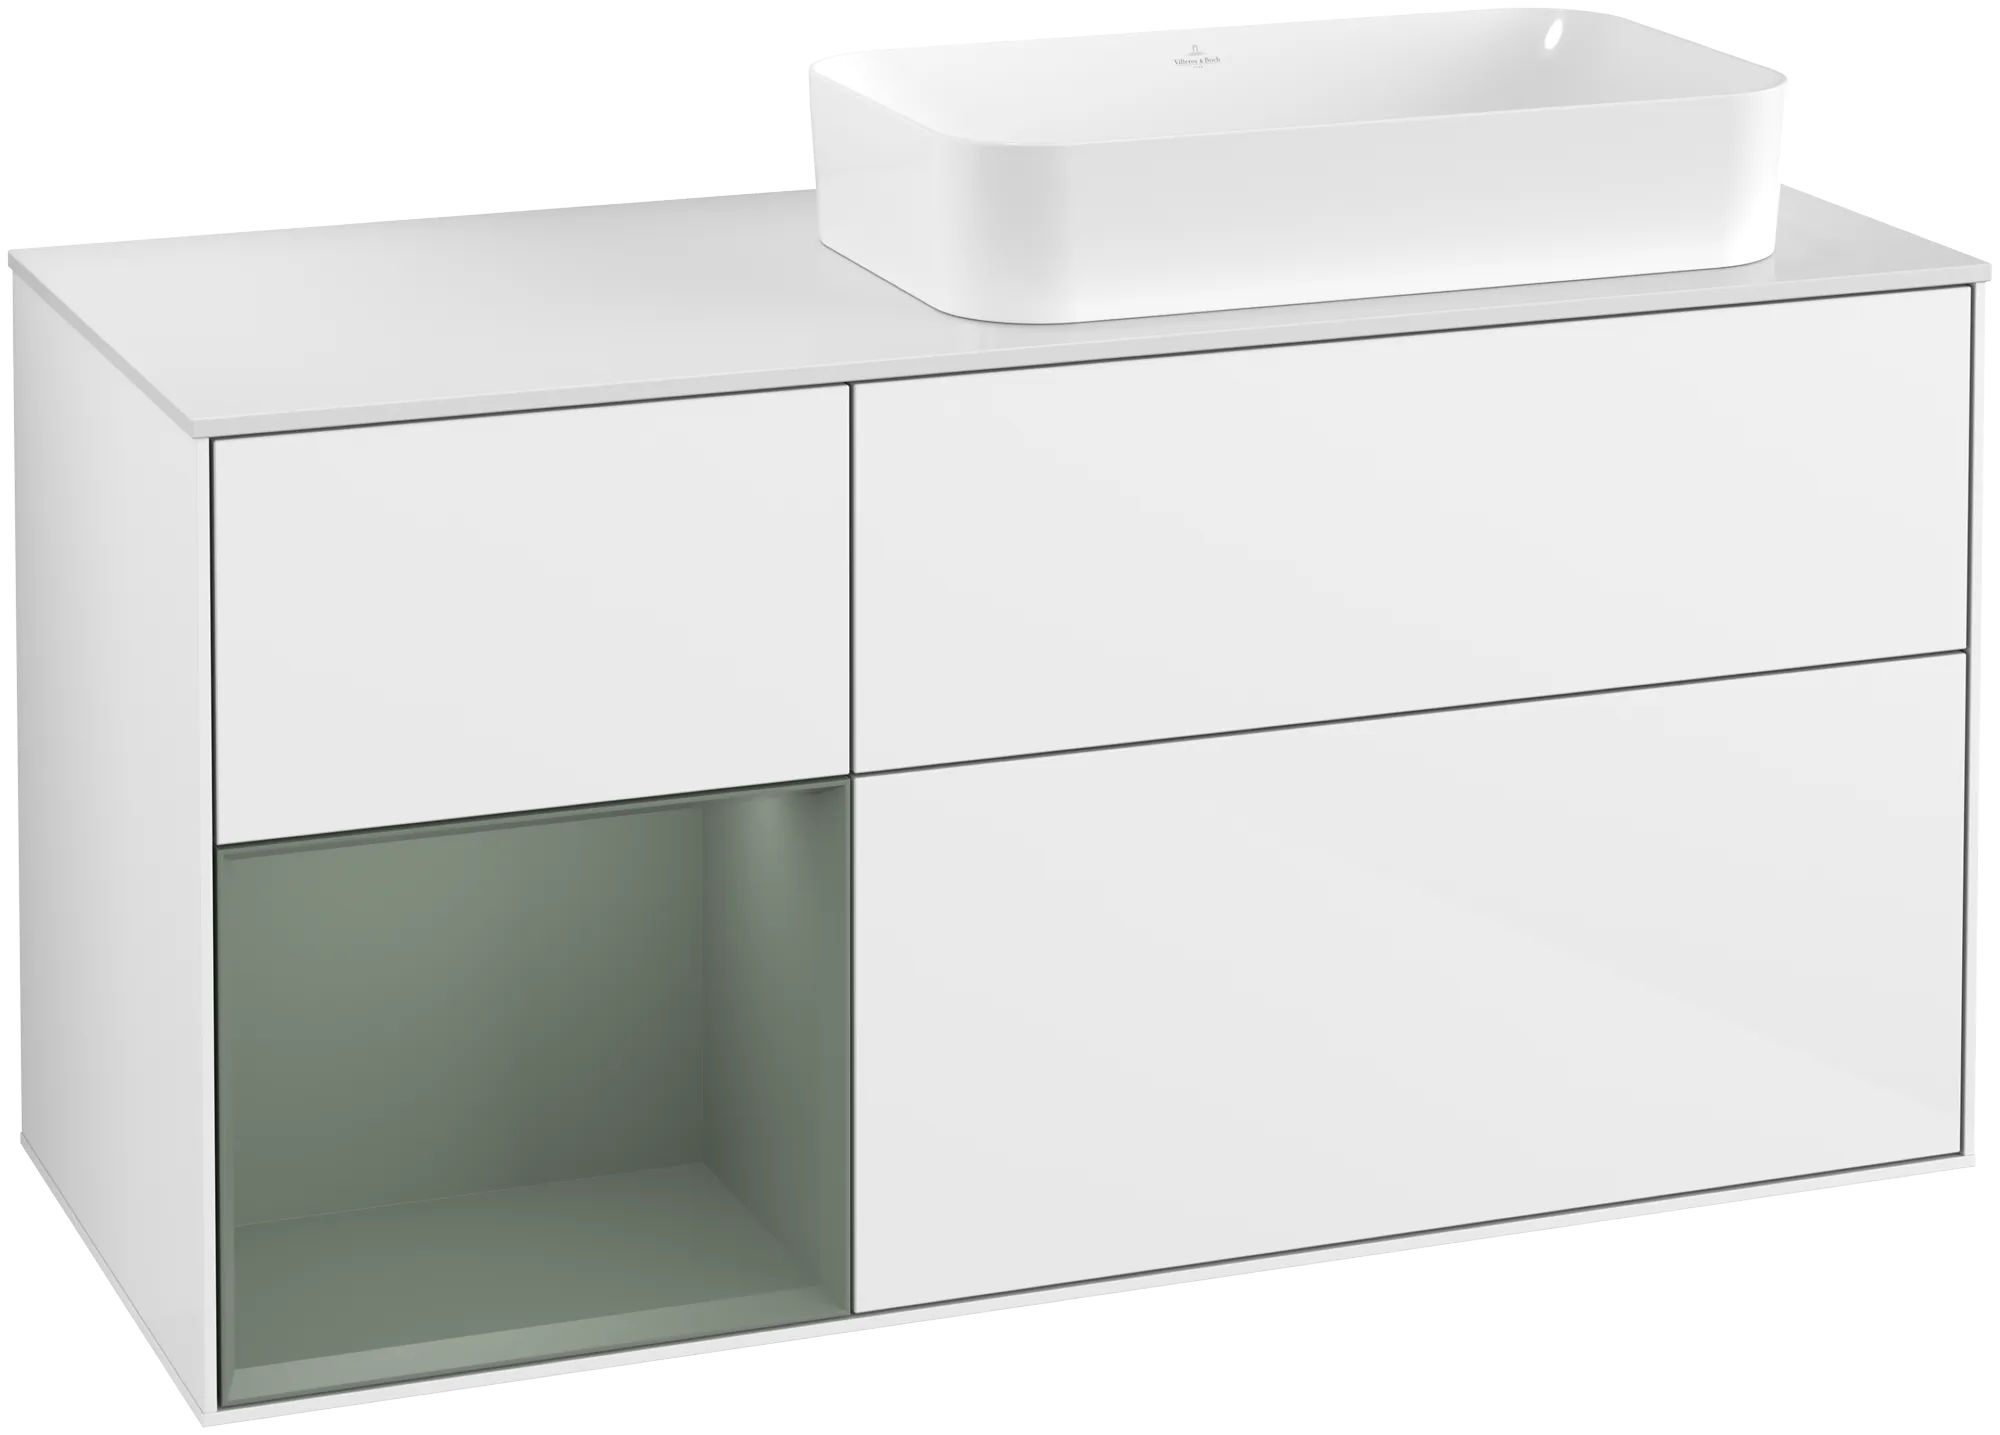 Picture of VILLEROY BOCH Finion Vanity unit, with lighting, 3 pull-out compartments, 1200 x 603 x 501 mm, Glossy White Lacquer / Olive Matt Lacquer / Glass White Matt #G681GMGF